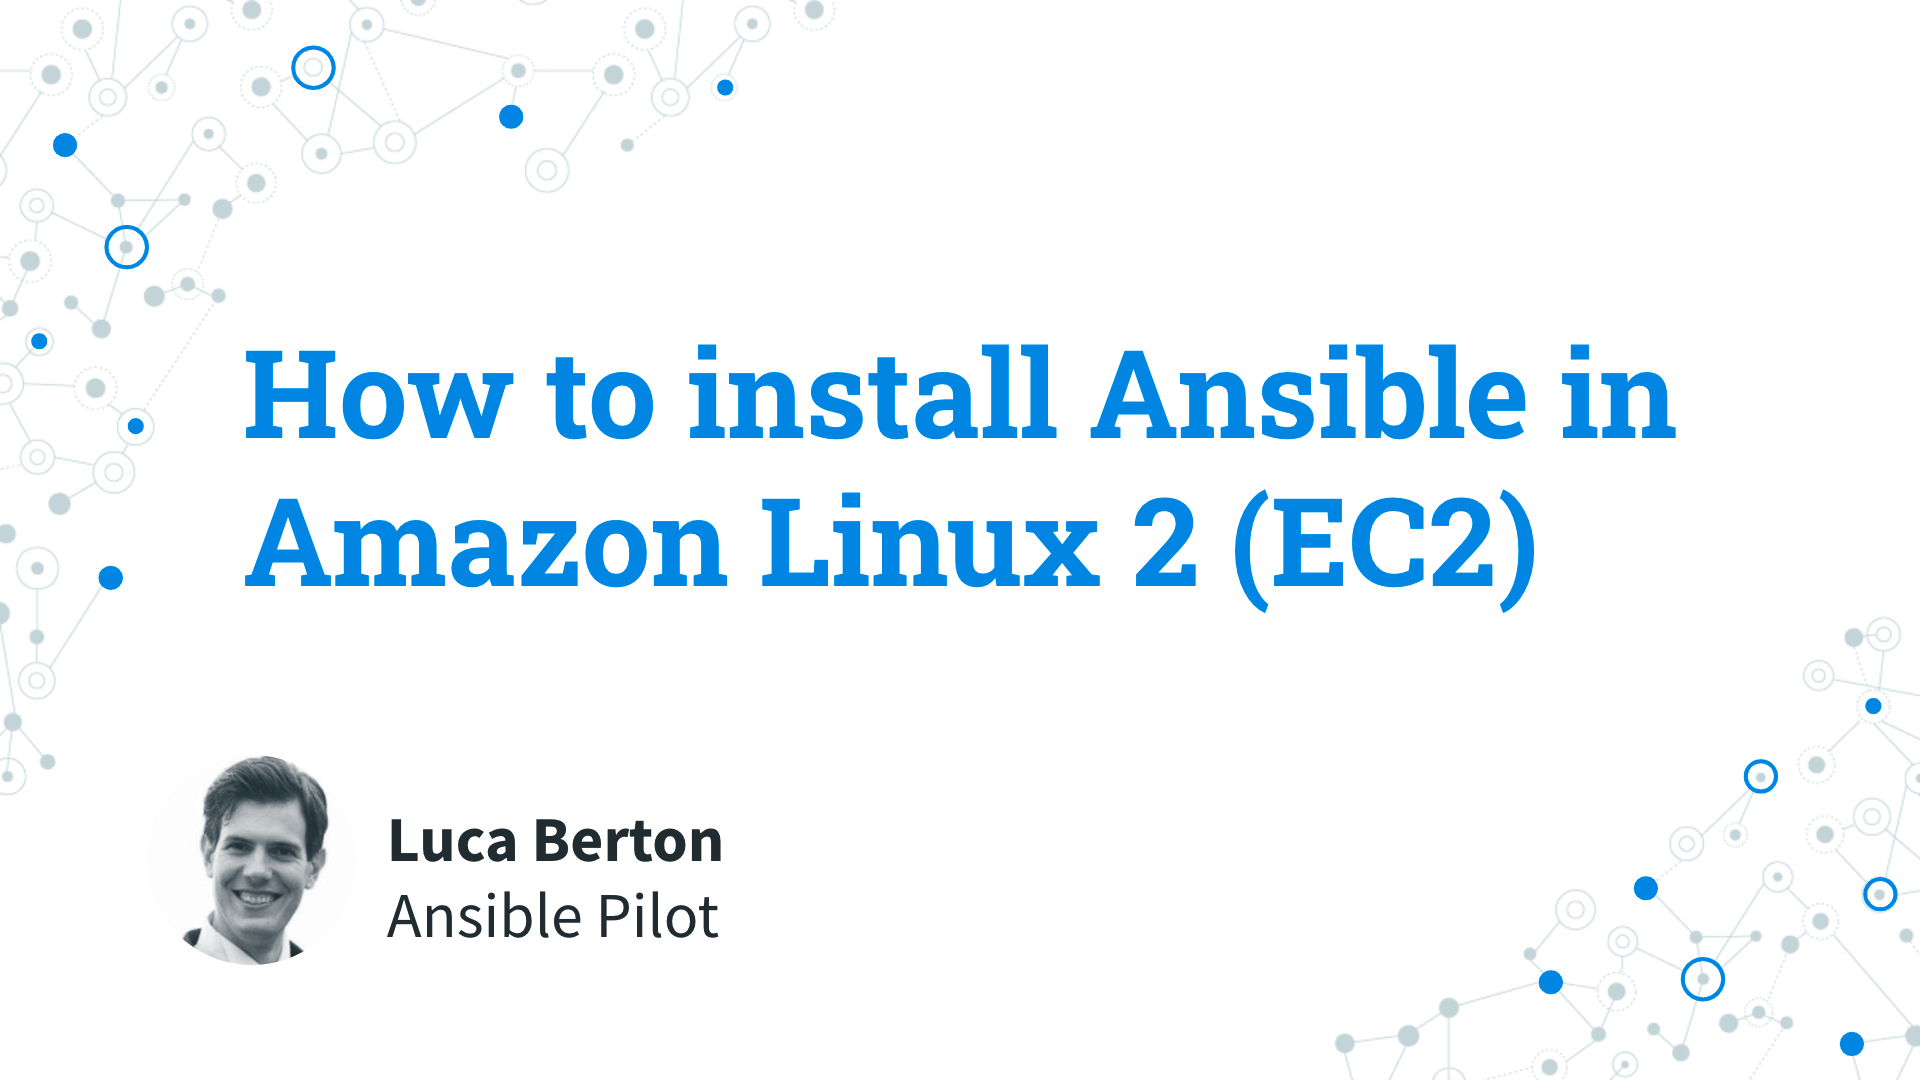 How to install Ansible in Amazon Linux 2 (AWS EC2) - Ansible install